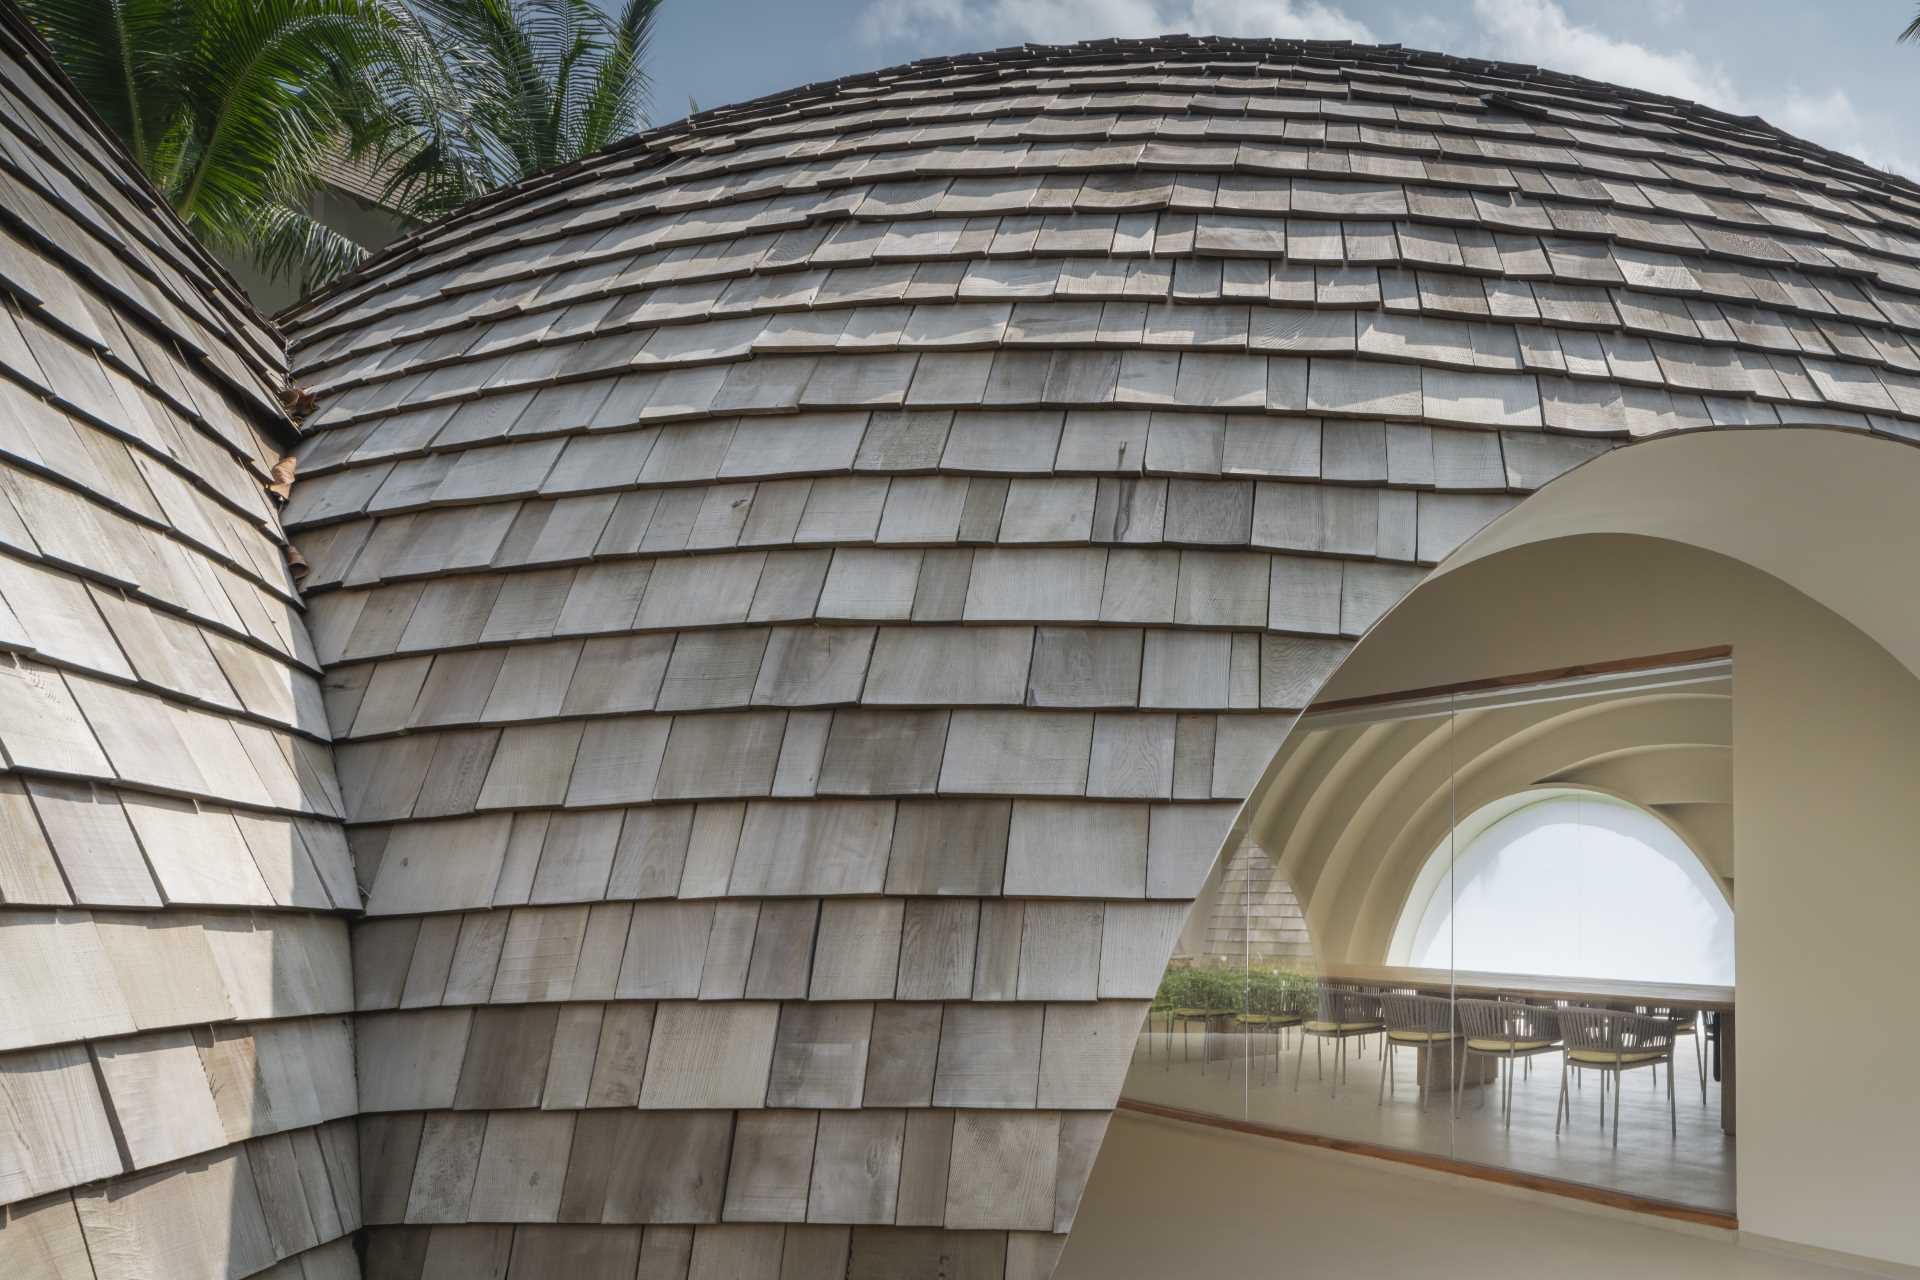 A modern hotel lobby whose design is inspired by the shape and interior of a coconut, and features a shingle-clad exterior.